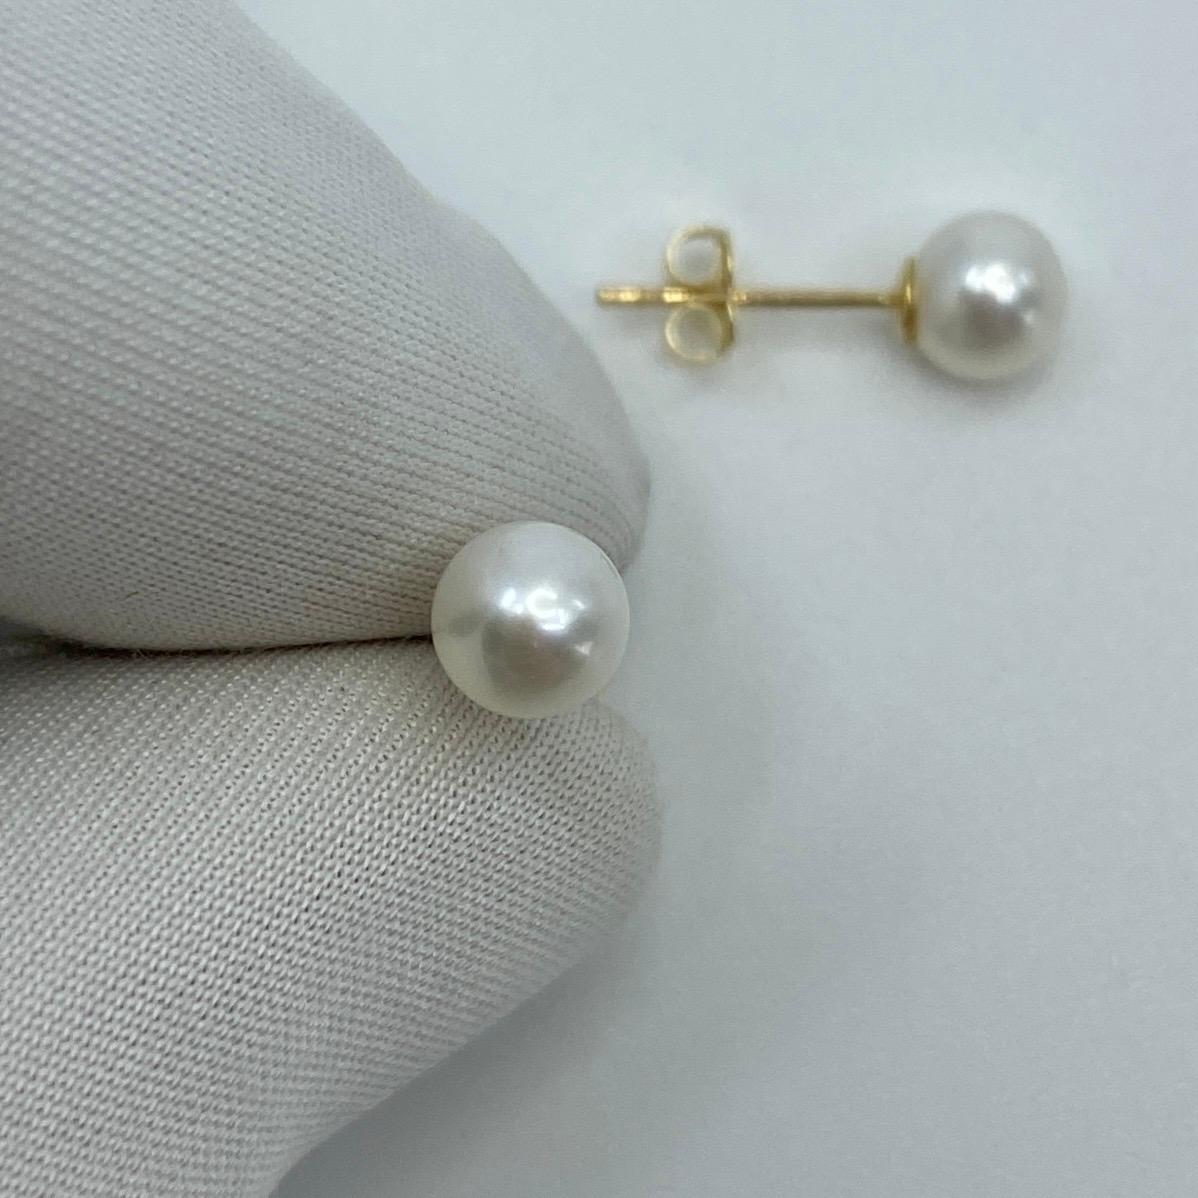 Cultured Freshwater White Pearl Yellow Gold Earring Studs.

Beautiful 5mm matching pair of round pearls with excellent lustre, shape and colour. 

Set in lightweight 9k yellow gold suds with butterfly backs.

Perfect matching pair.

Brand new and